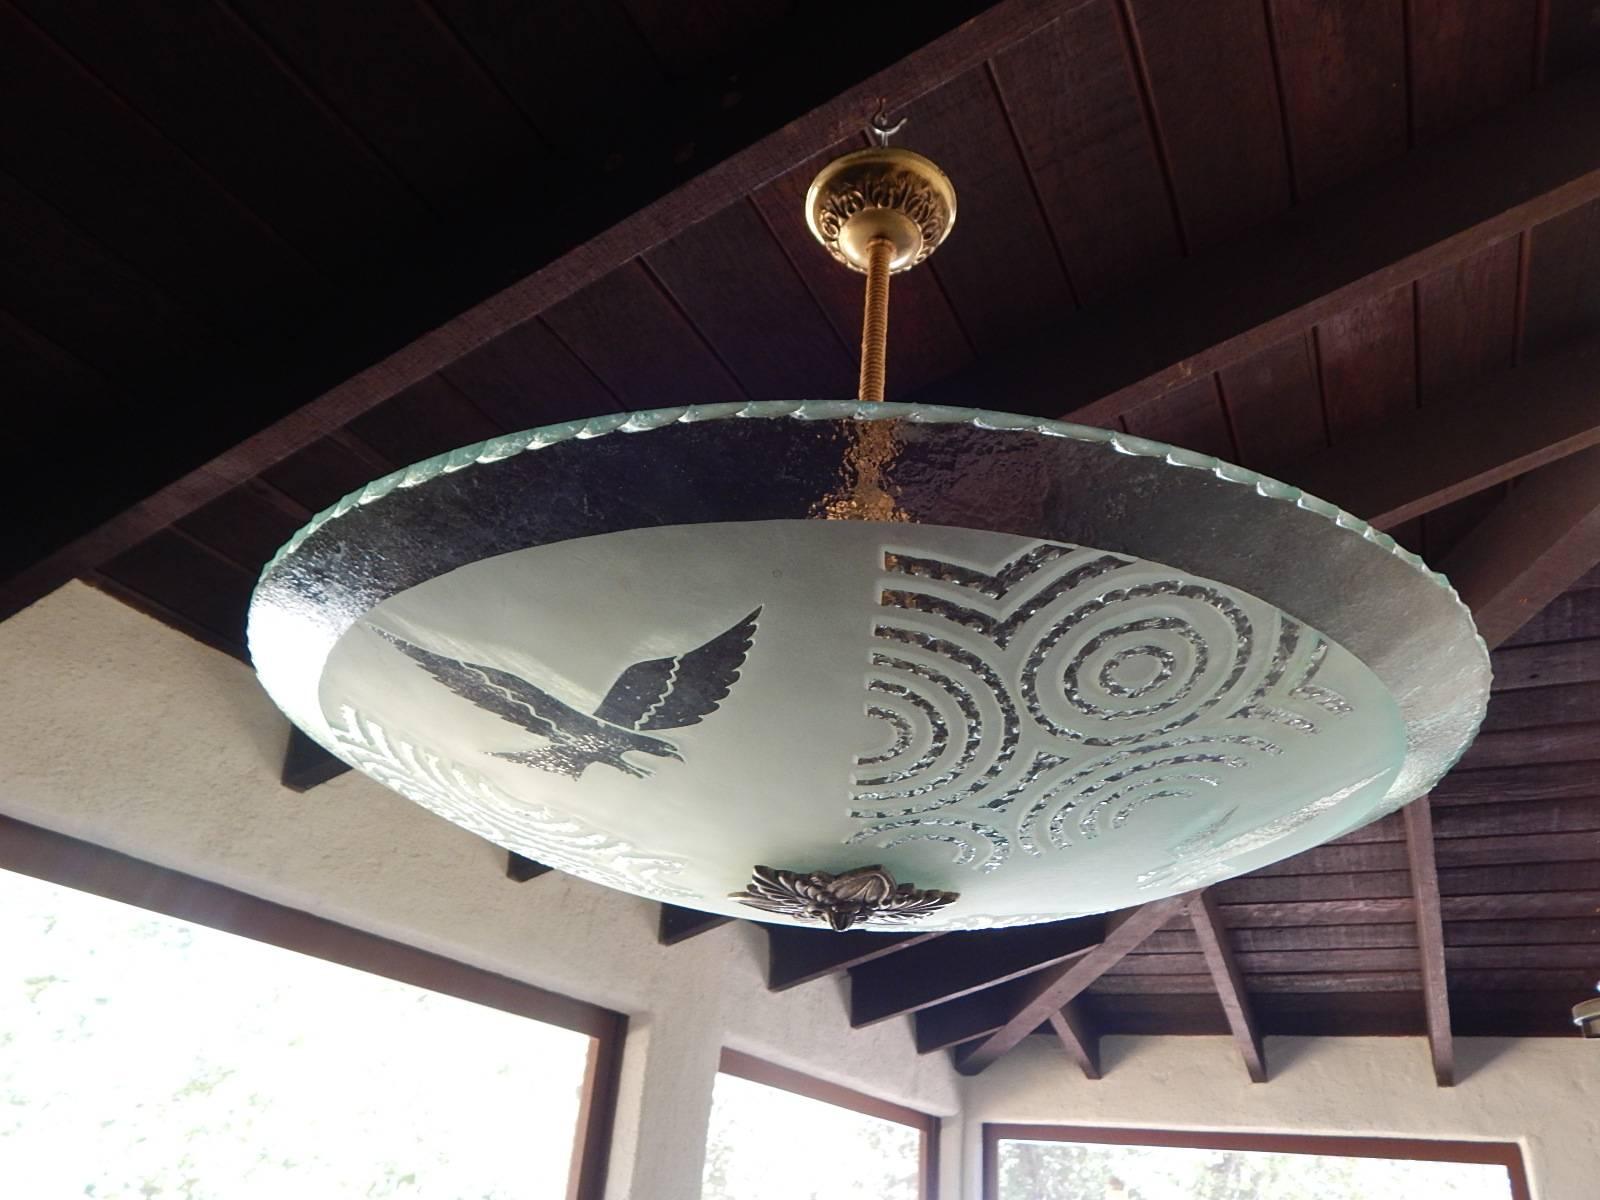 Swedish Art Deco Etched Glass Lighting Fixture with Eagle Motif, circa 1930 For Sale 2